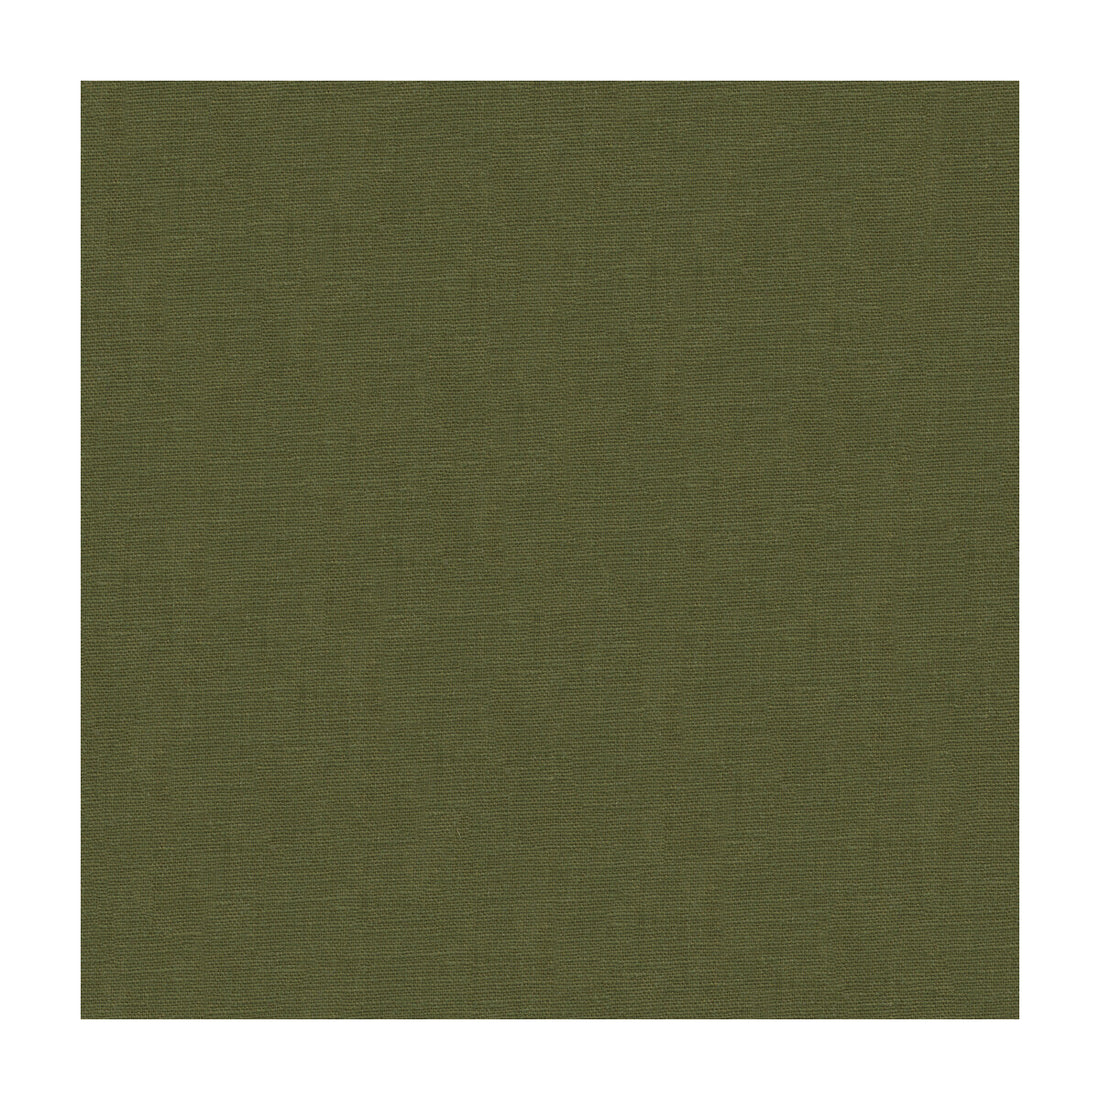 Dublin fabric in bamboo color - pattern 32344.303.0 - by Kravet Basics in the Perfect Plains collection